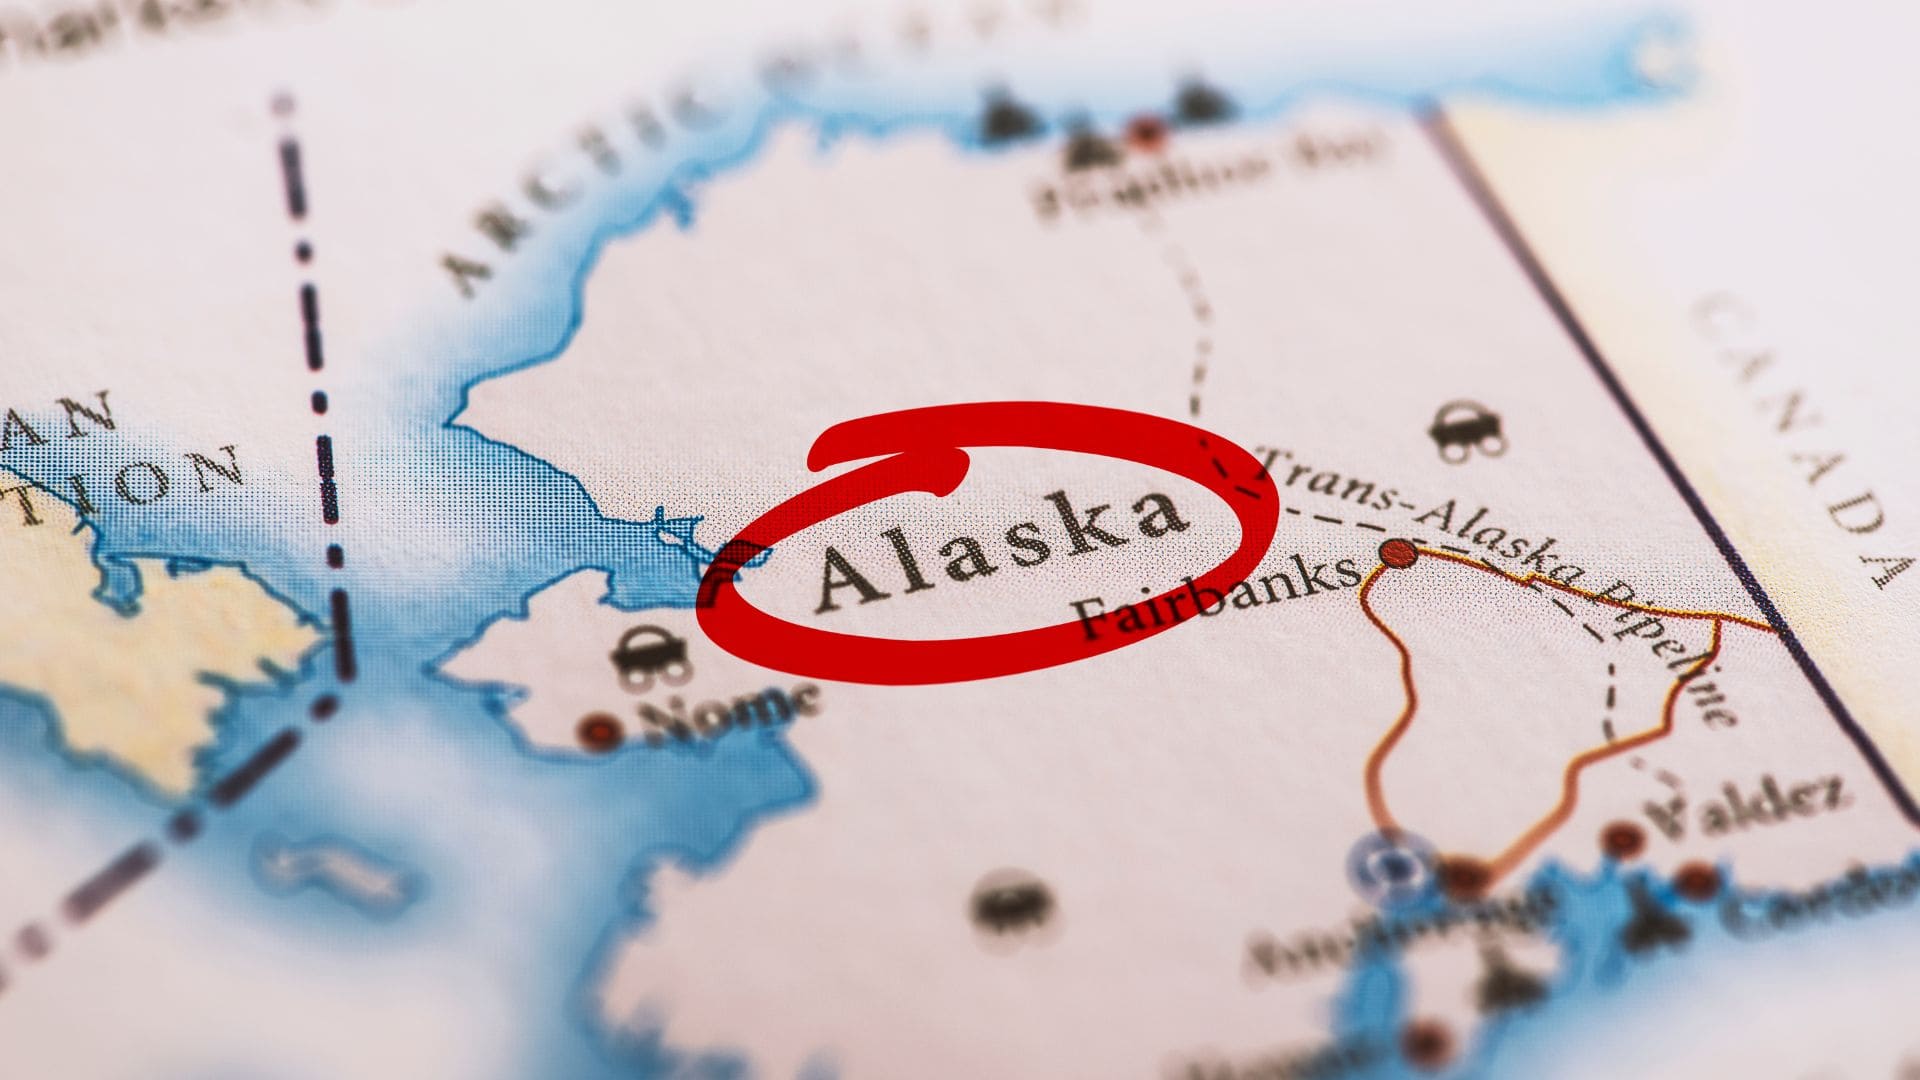 If you live in Alaska you will get this Stimulus check if you are eligible